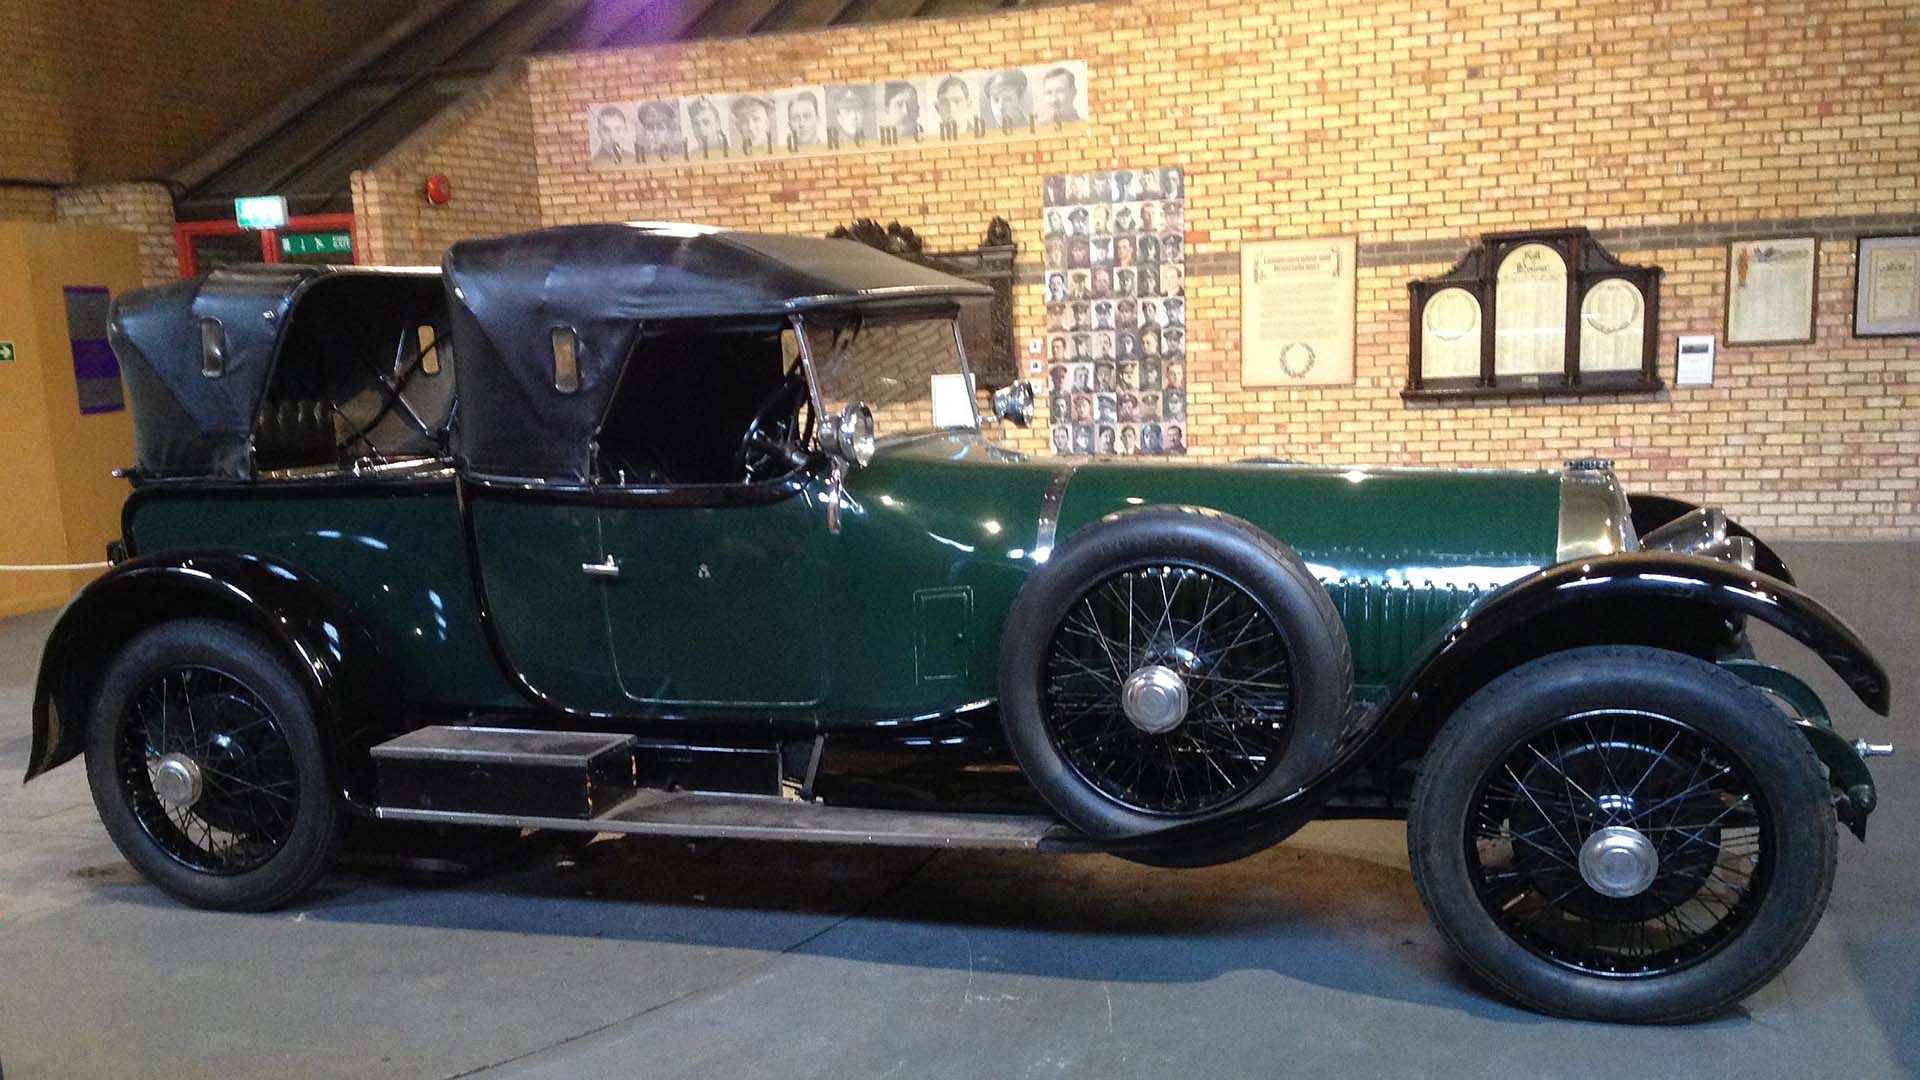 Side elevation of a large vintage car in dark green with a black leather convertible roof, chromed lamps and spoked wheels.